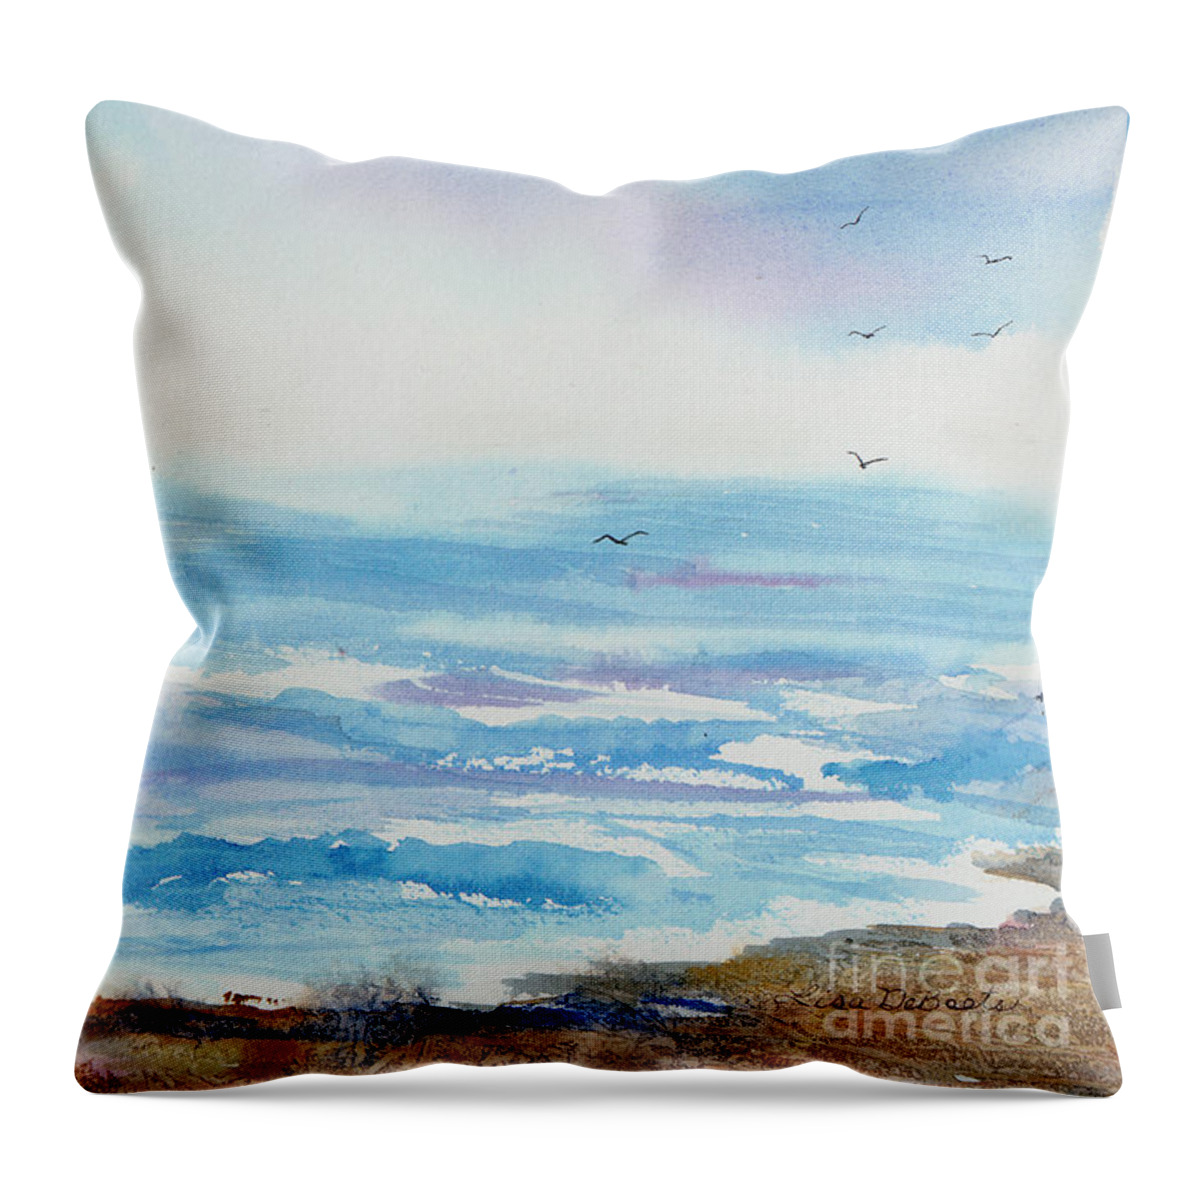 Ocean Shores Throw Pillow featuring the painting Ocean Shores by Lisa Debaets